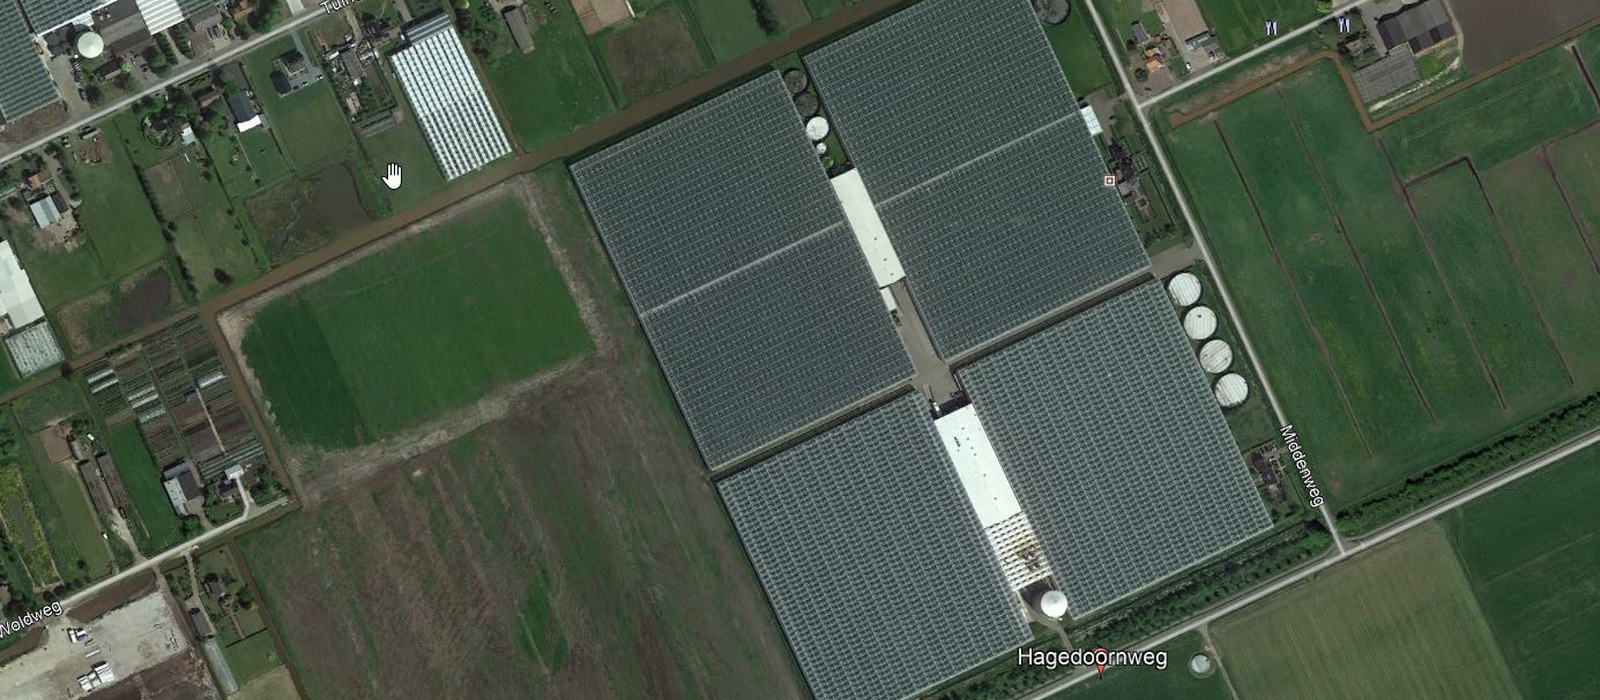 Guidance purchase of approx. 14 ha of greenhouse horticulture land in IJsselmuiden